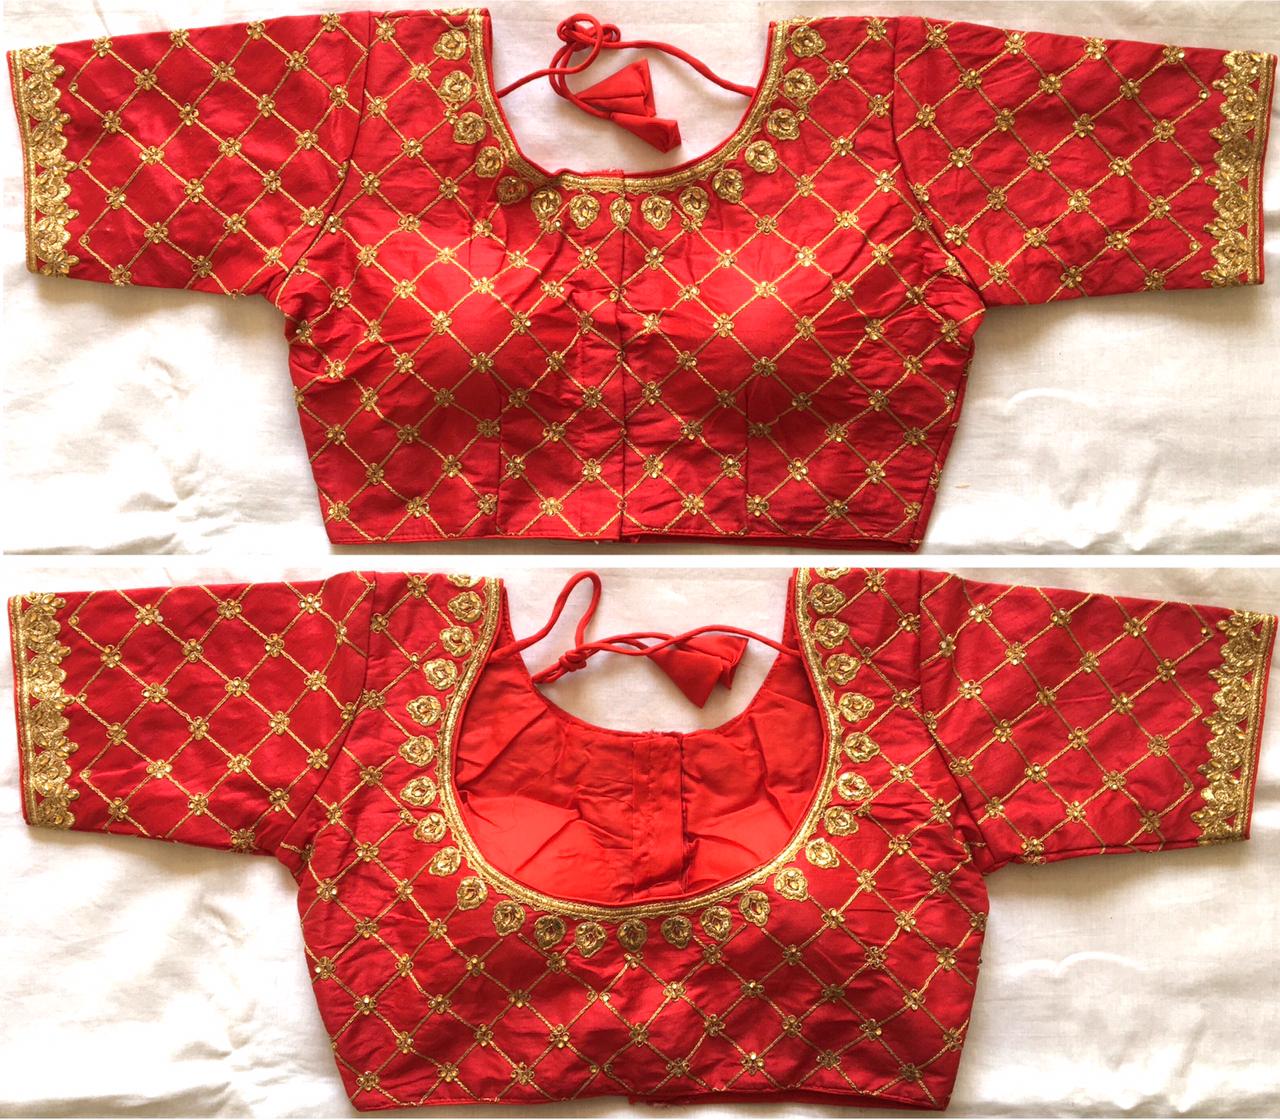 Readymade Blouse in Red - Rsm Silks Online